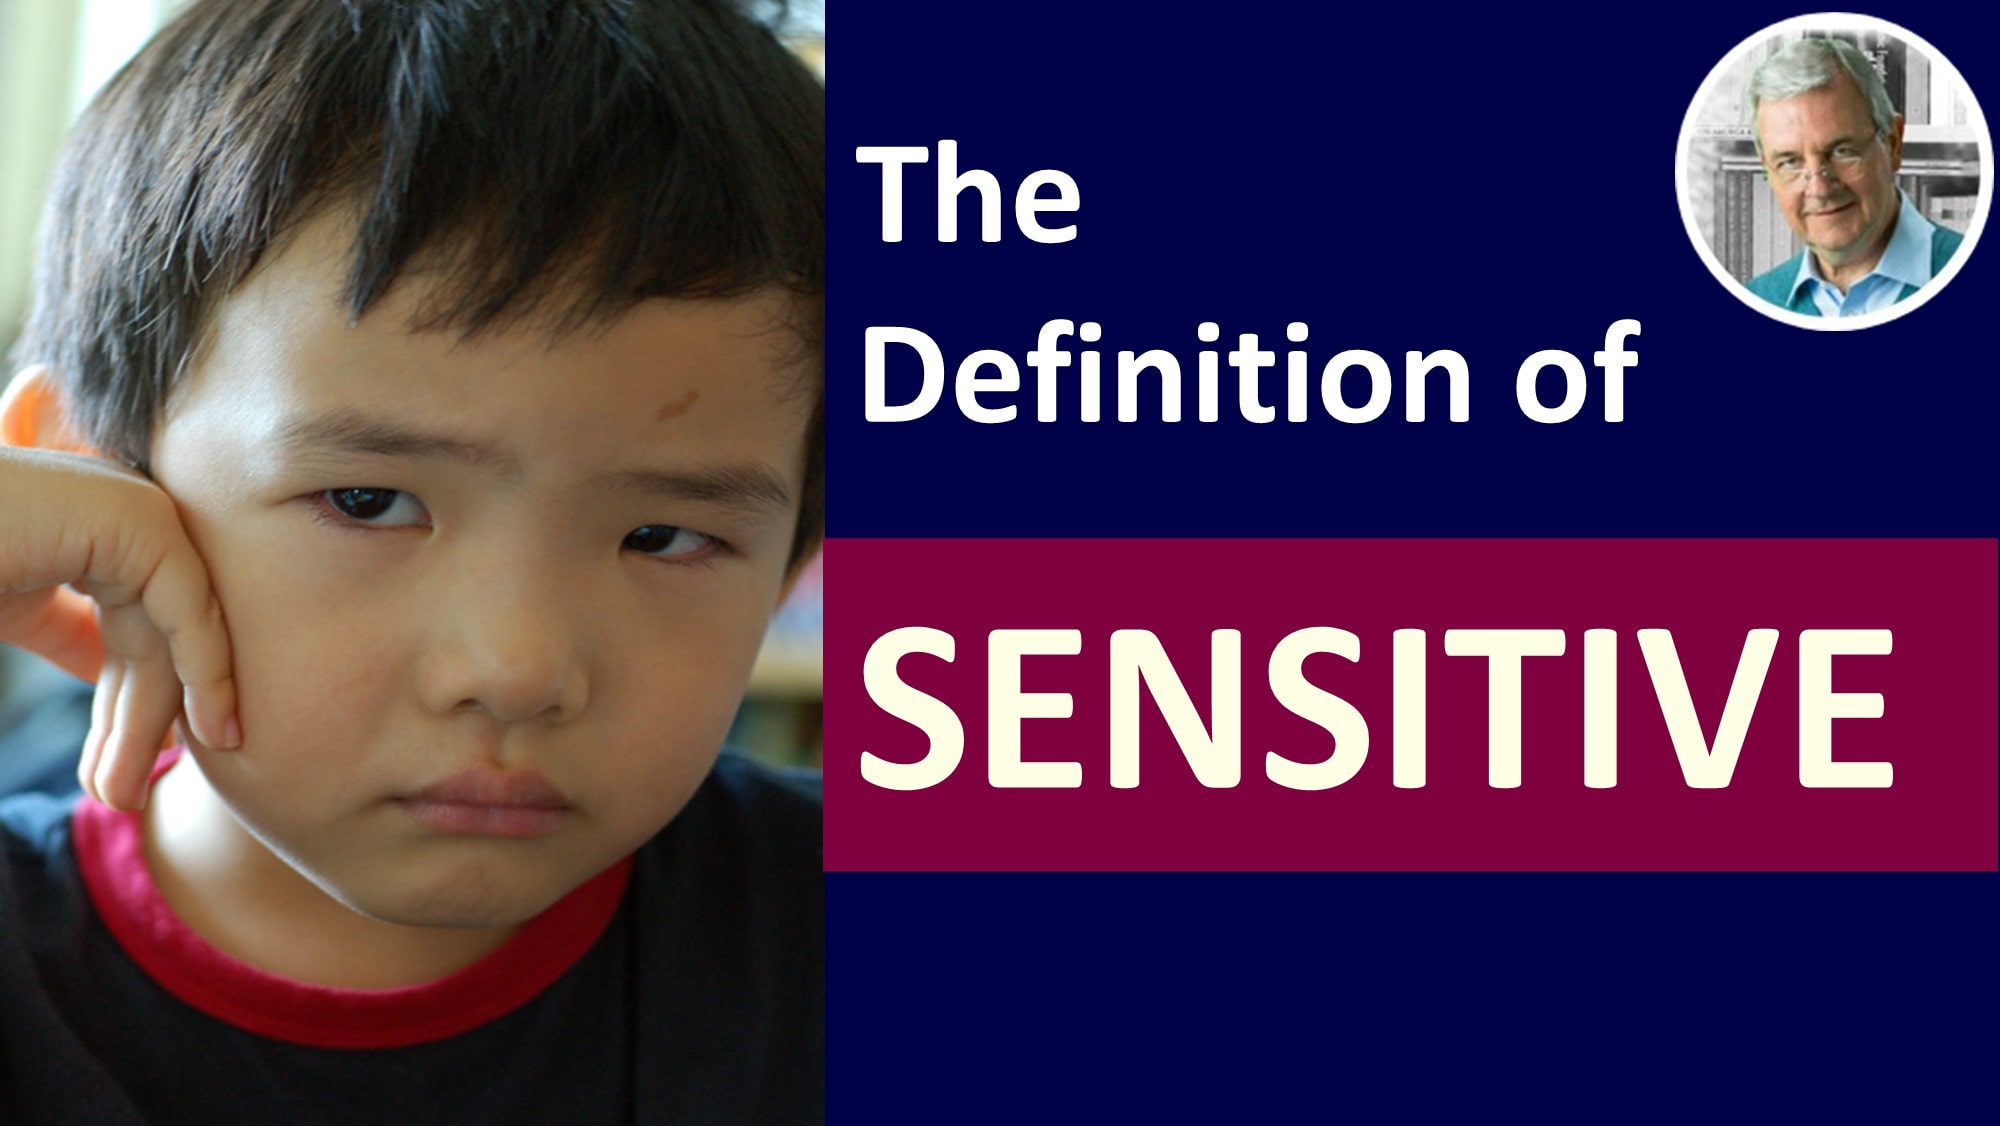 meaning of sensitive - sensitive in a sentence